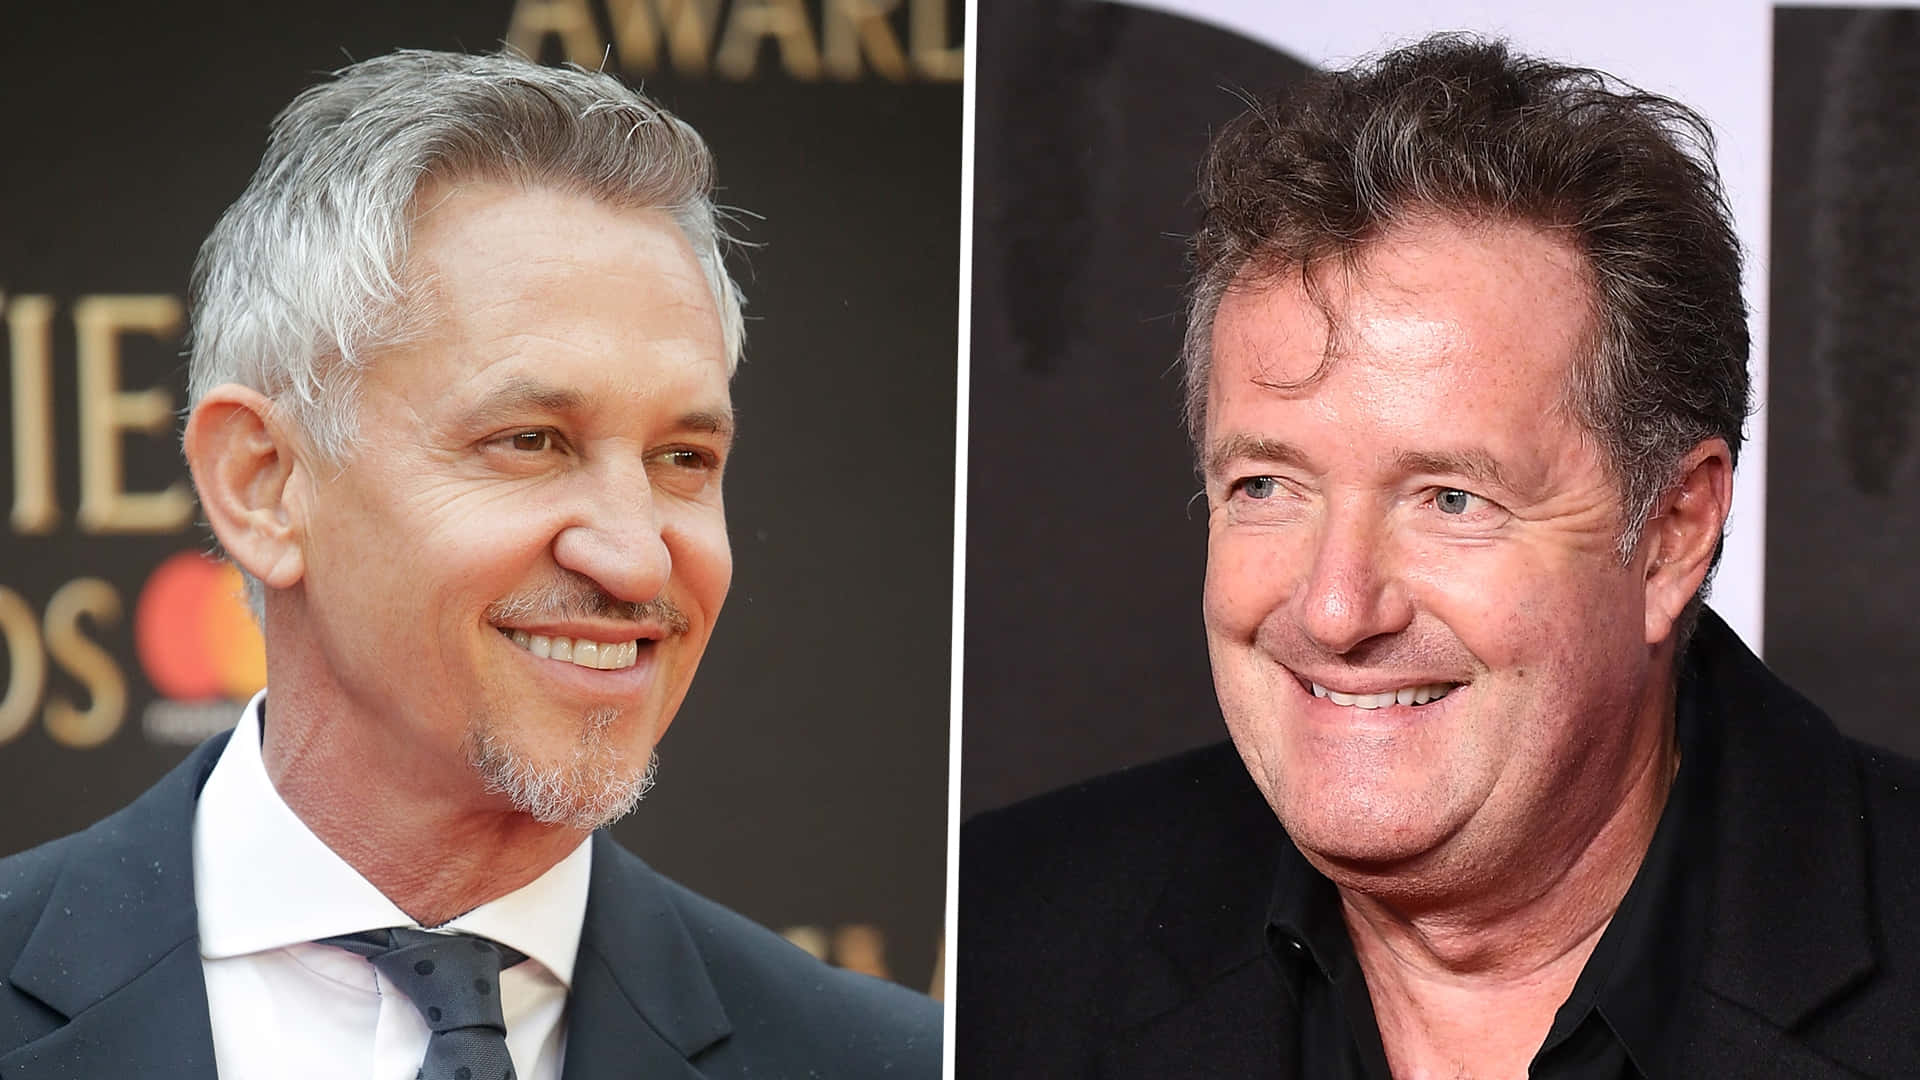 Gary Lineker and Piers Morgan engaged in a friendly conversation Wallpaper